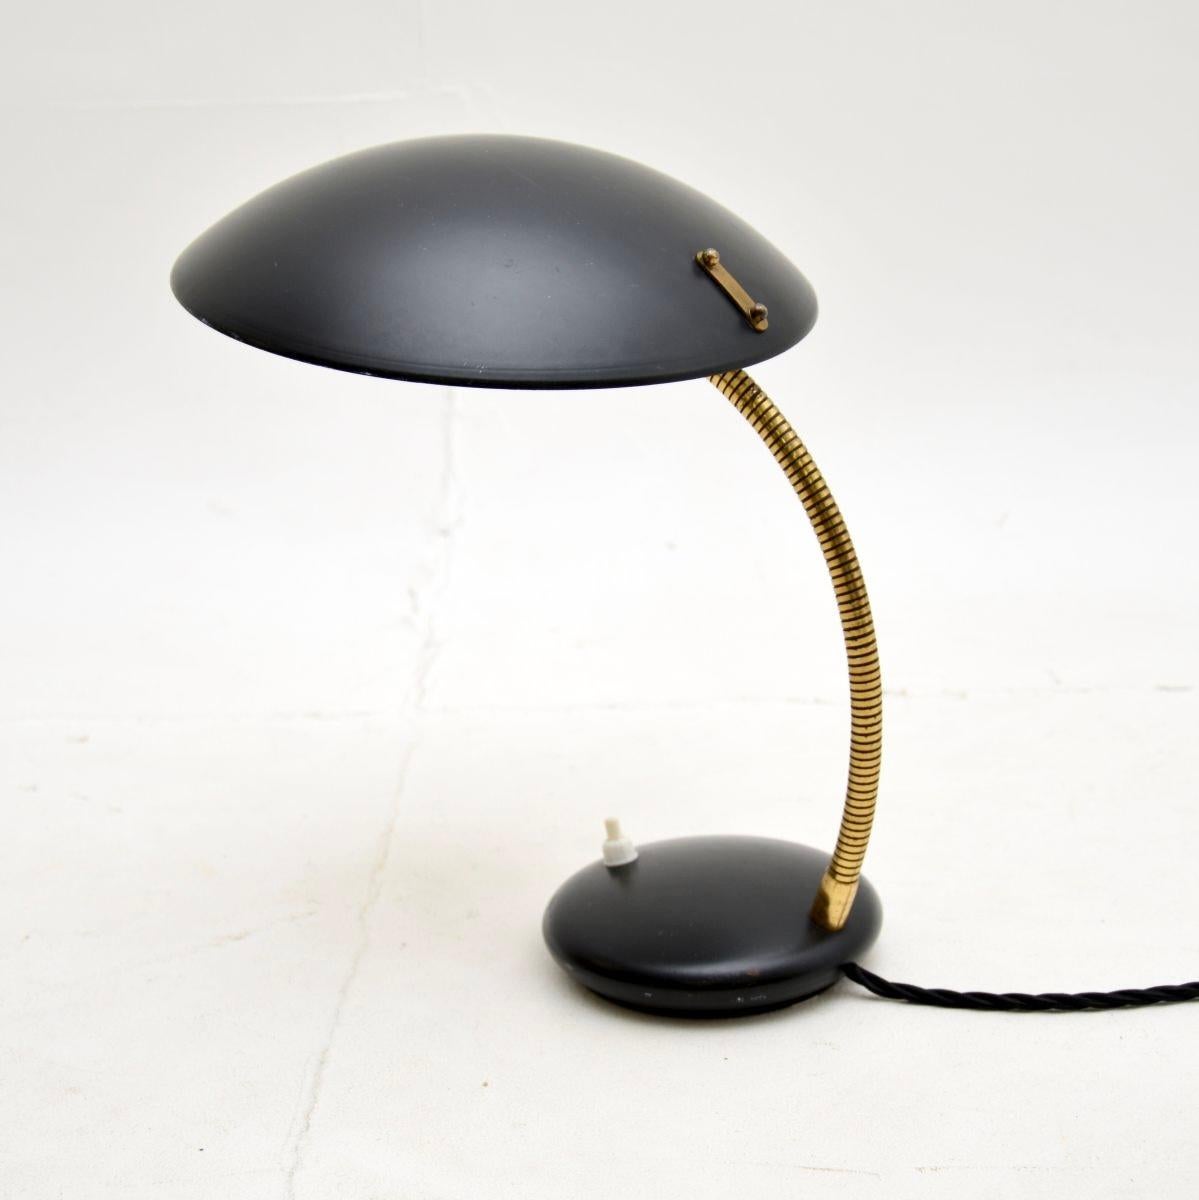 A wonderful vintage French enameled tole and brass desk lamp. This was recently imported from France, it dates from the 1960-70’s.

It is of superb quality, the shade and base are black enameled tole and are held together by an articulated brass